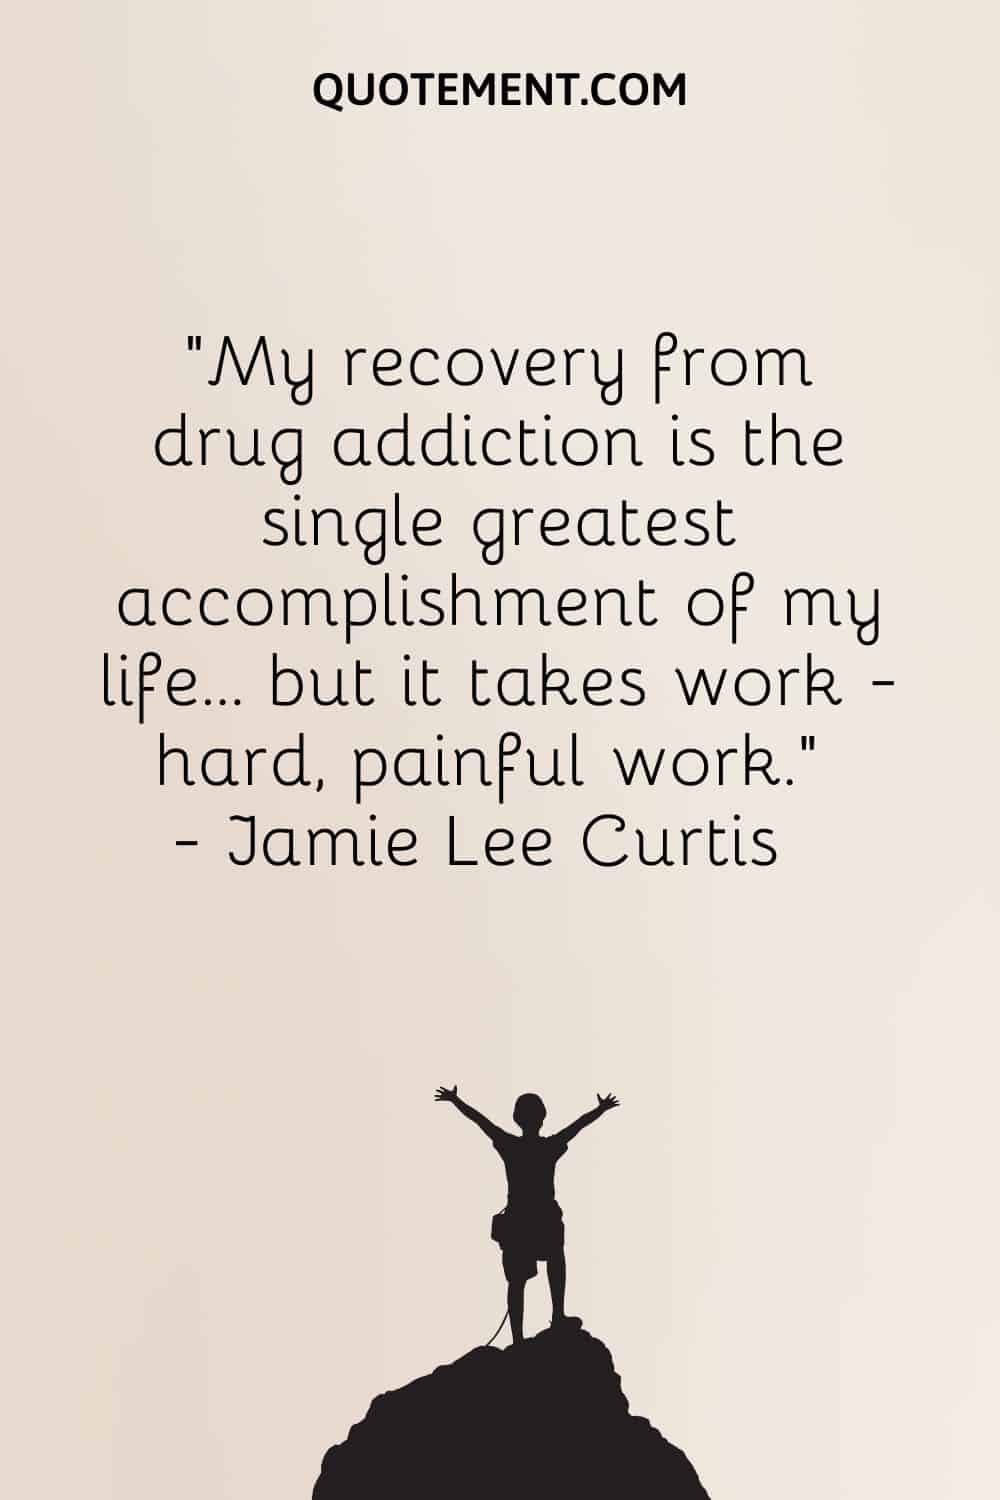 My recovery from drug addiction is the single greatest accomplishment of my life